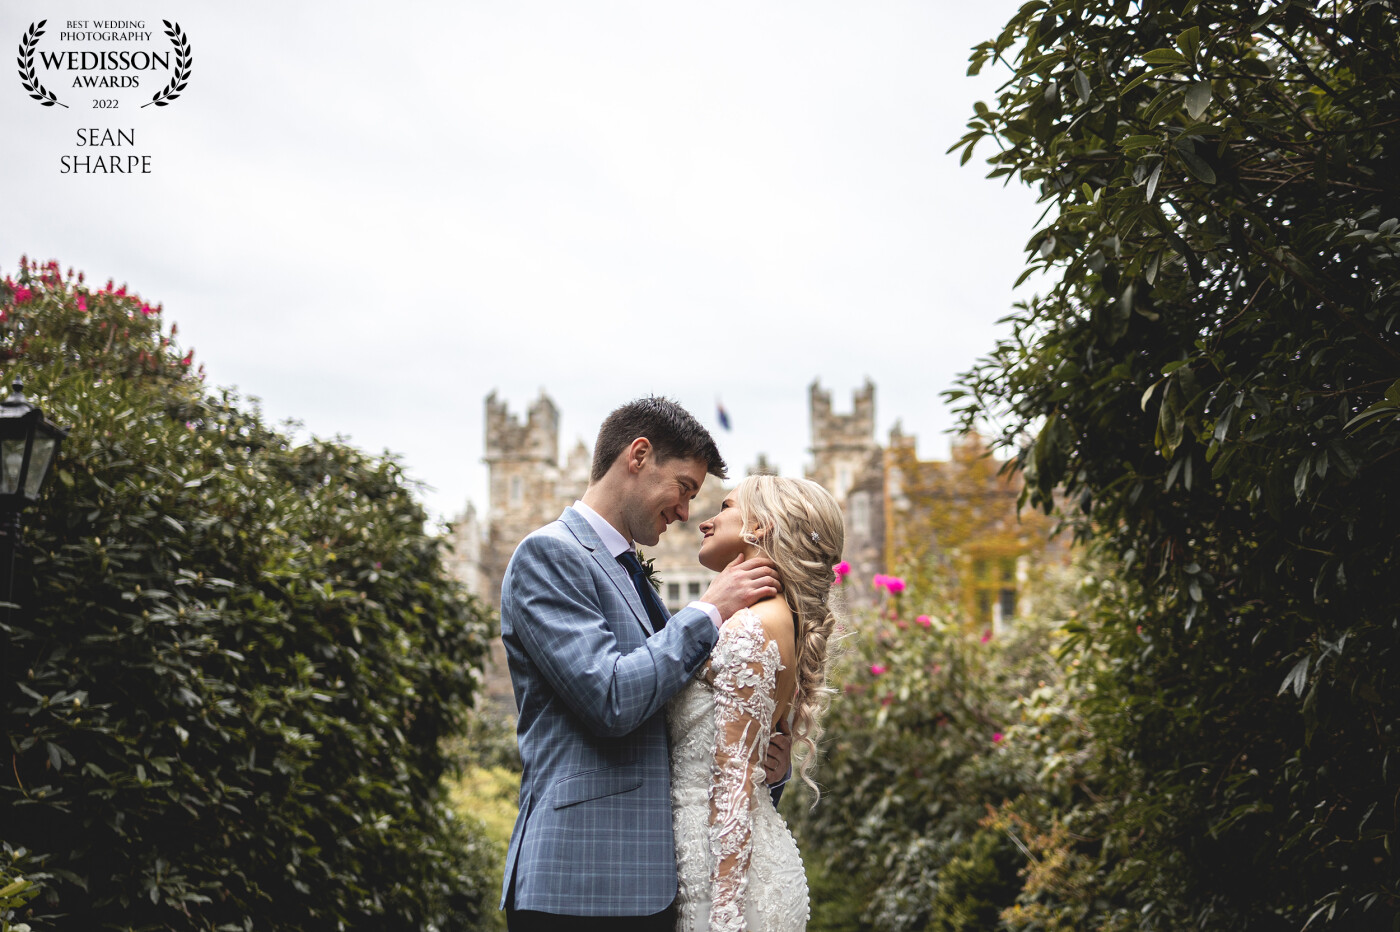 One of two awards taken at the beautiful Waterford Castle, Ireland. Olivia and Darragh were just a photographer's dream to work with it. Such a stunning location and amazing day!